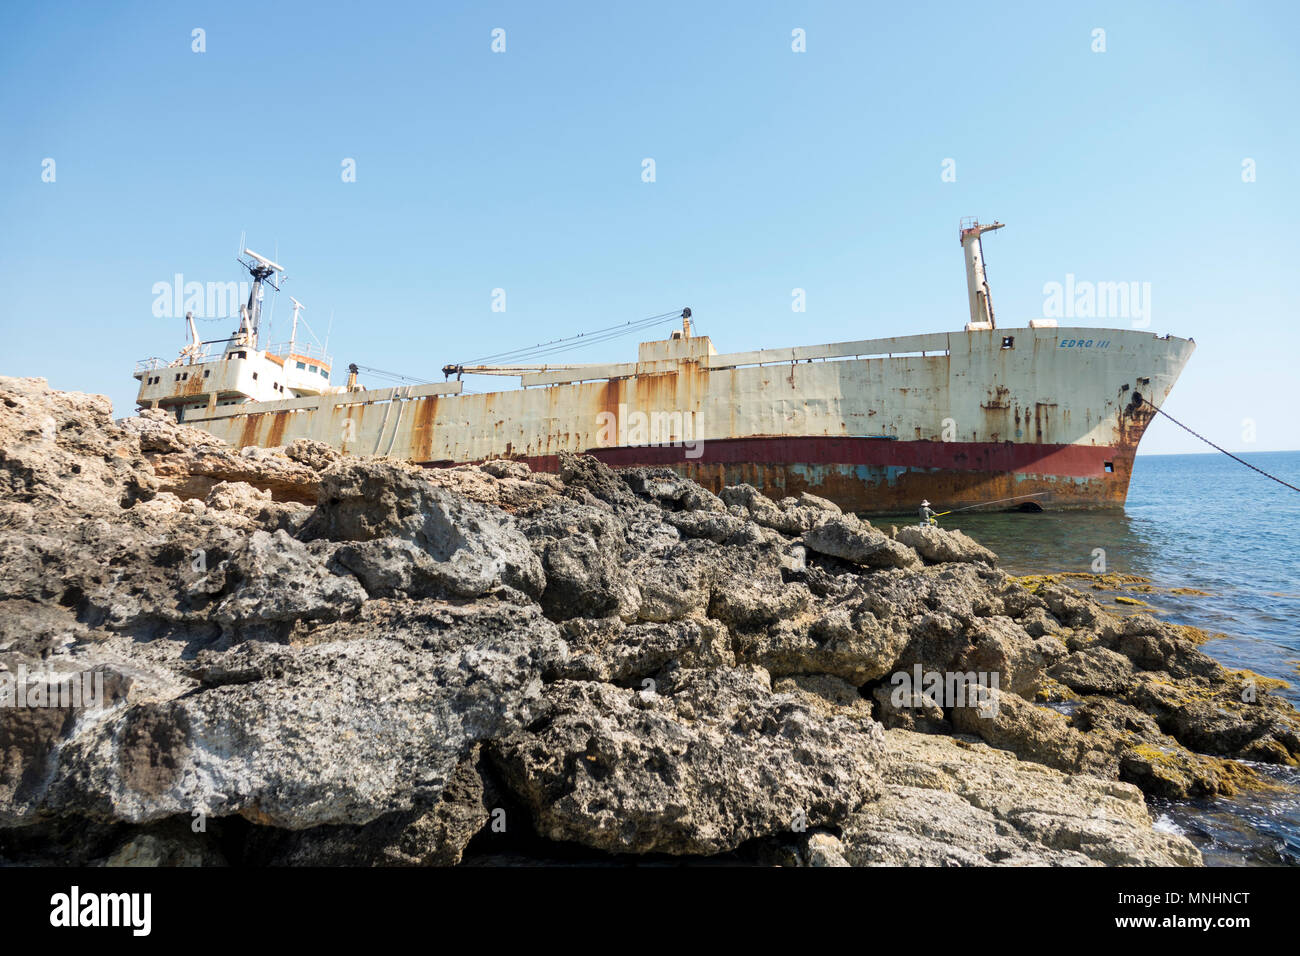 Coral Bay, Pafos, Cyprus. 17/05/2018. Pic shows: The Sierra Leone-flagged cargo shiip, Edro III, ran aground off Pegeia on the 8th of December 2011 du Stock Photo